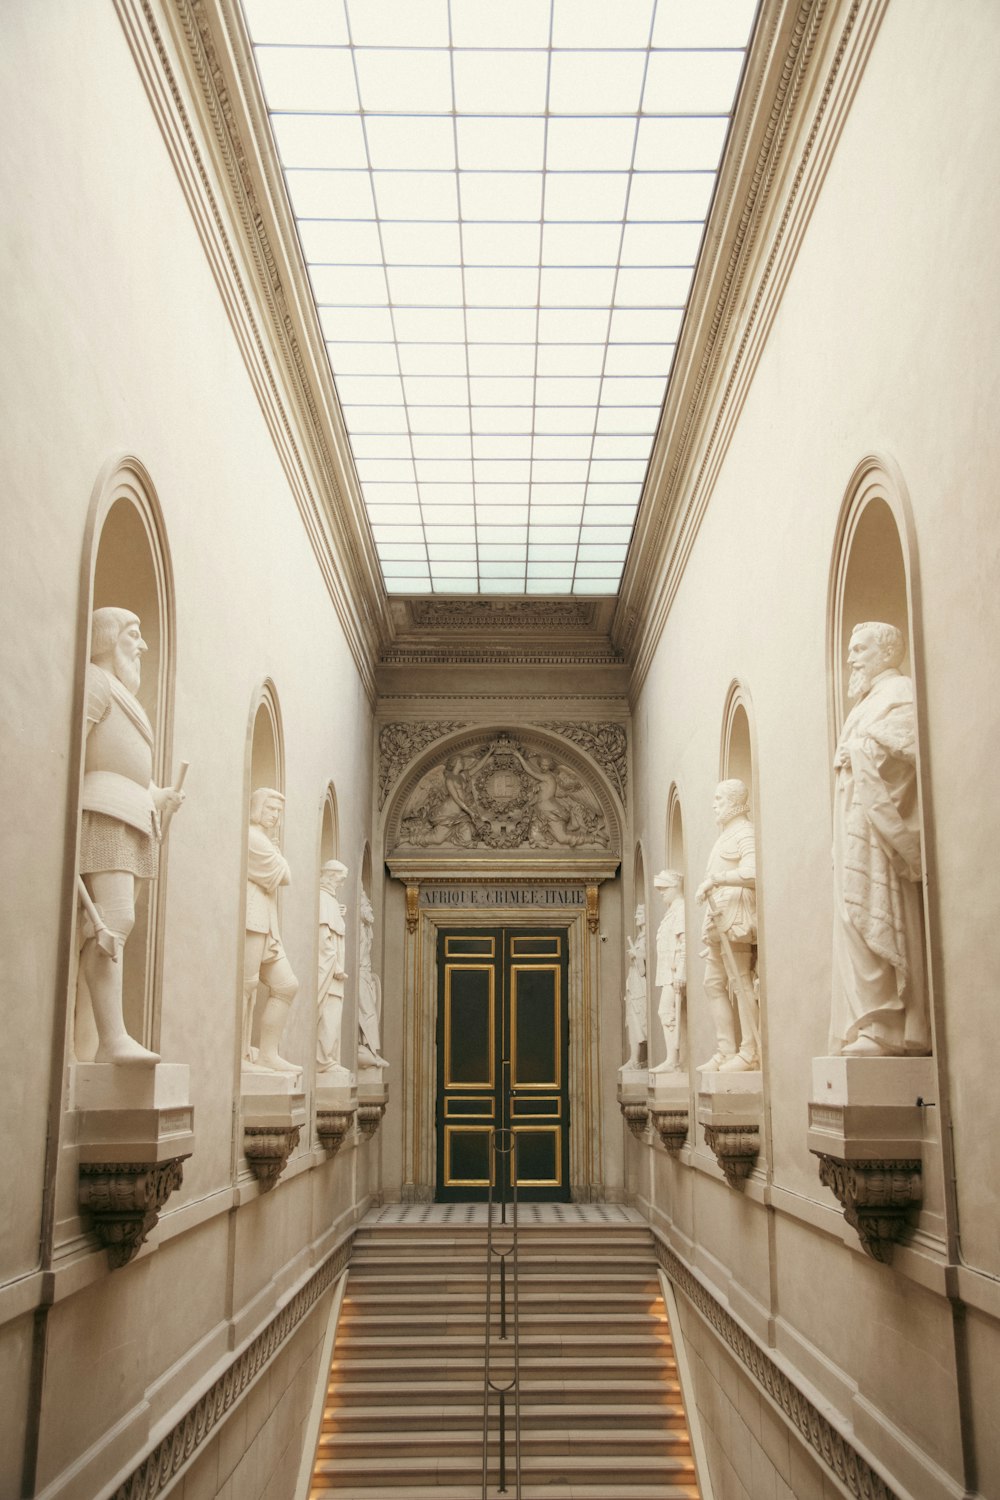 a very long hallway with some statues on the walls